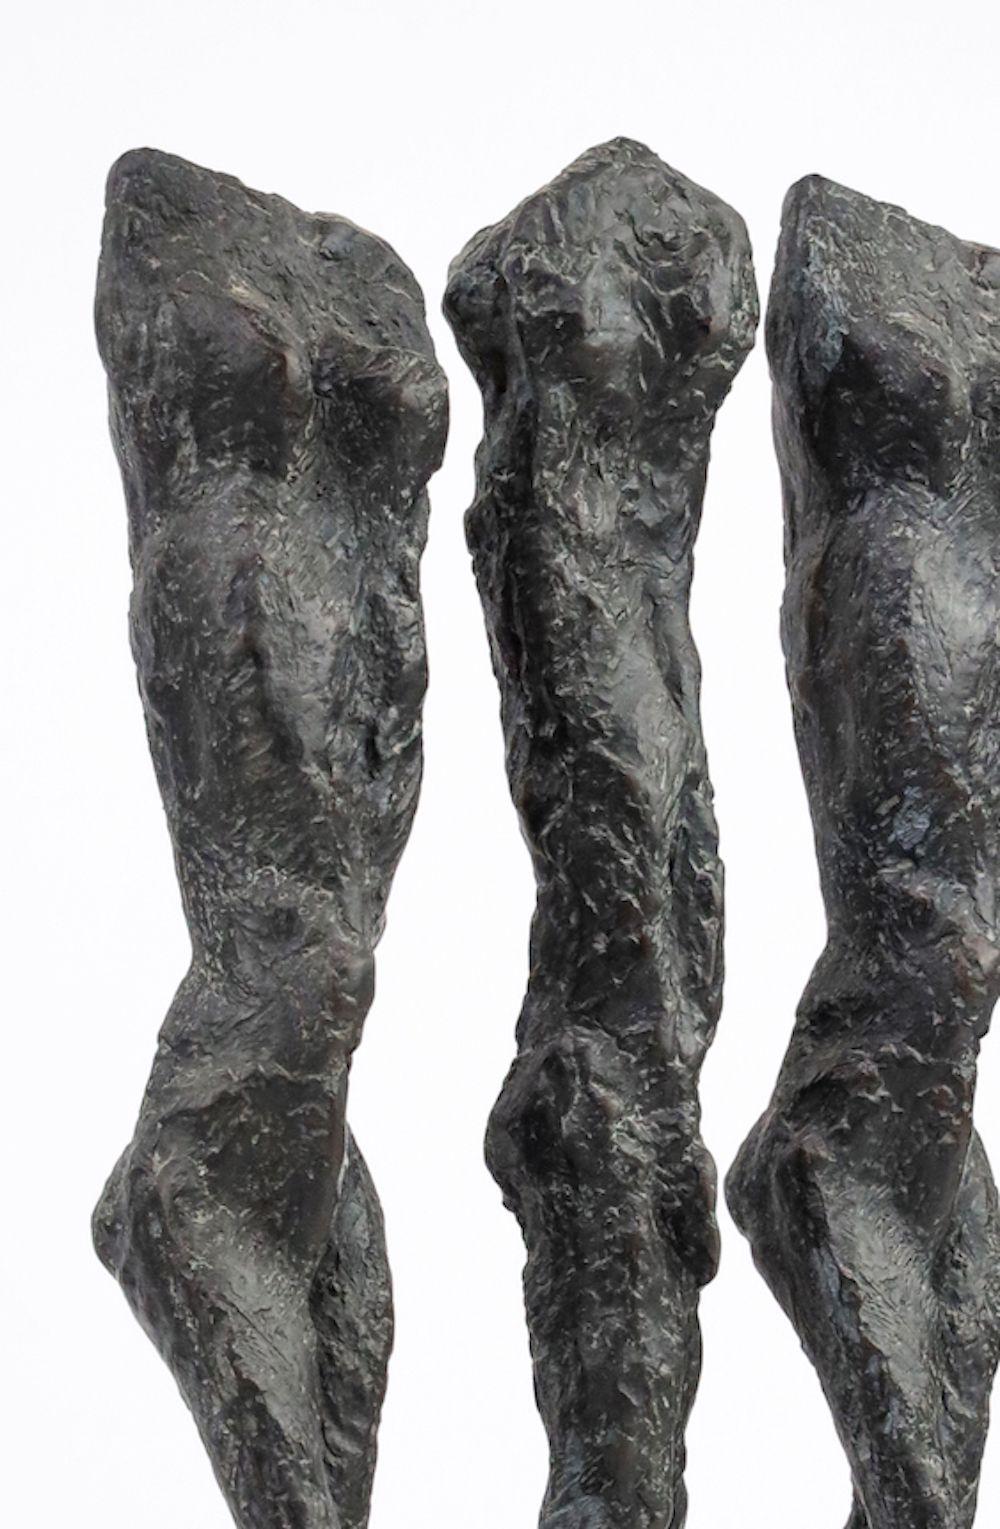 In Line by M. Demal - Bronze sculpture, group of female figures, semi-abstract - Sculpture by Martine Demal